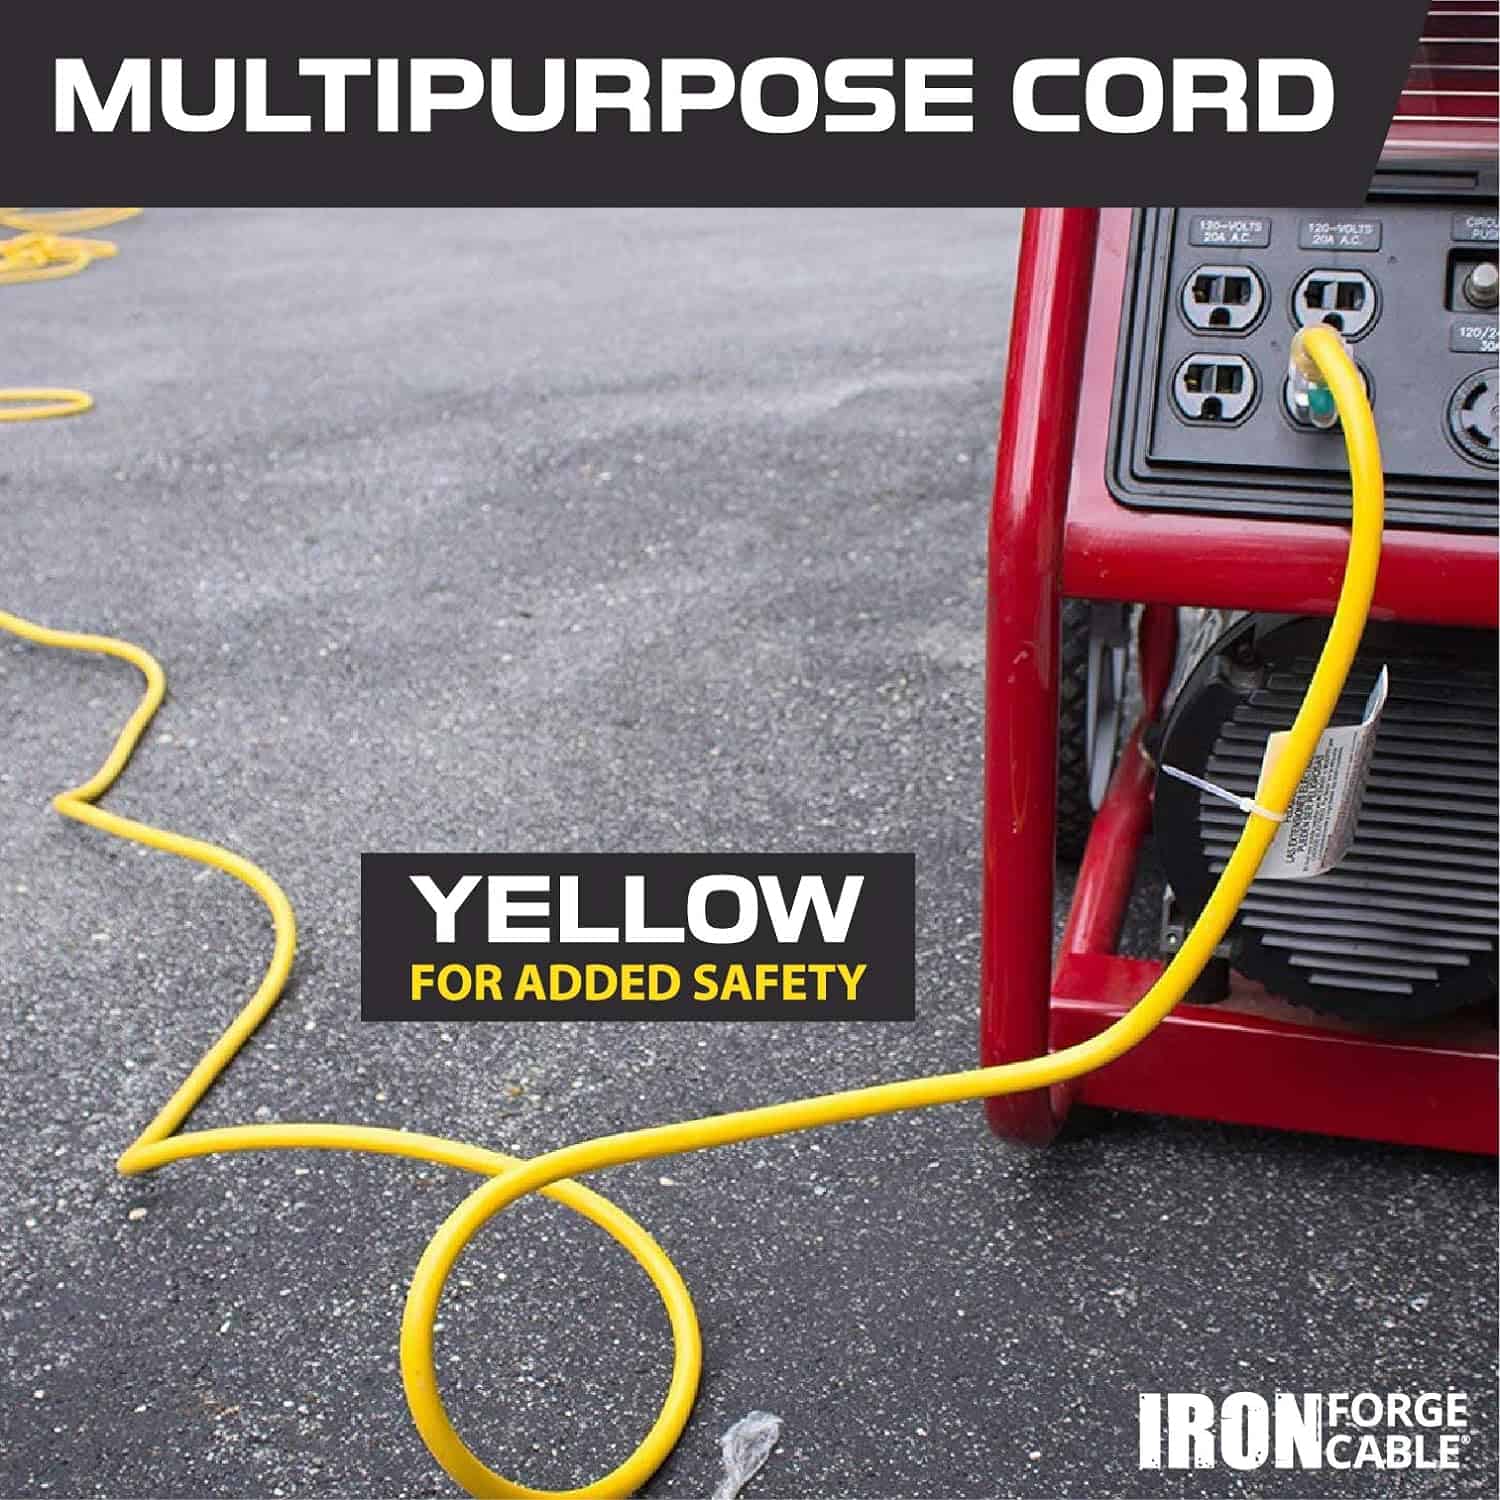 IRON FORGE CABLE 75 Foot Lighted Outdoor Extension Cord with 3 Electrical Power Outlets – 12 3 SJT Heavy Duty Yellow Extension Cable with 3 Prong Grounded Plug for Safety, 15 AMP 6